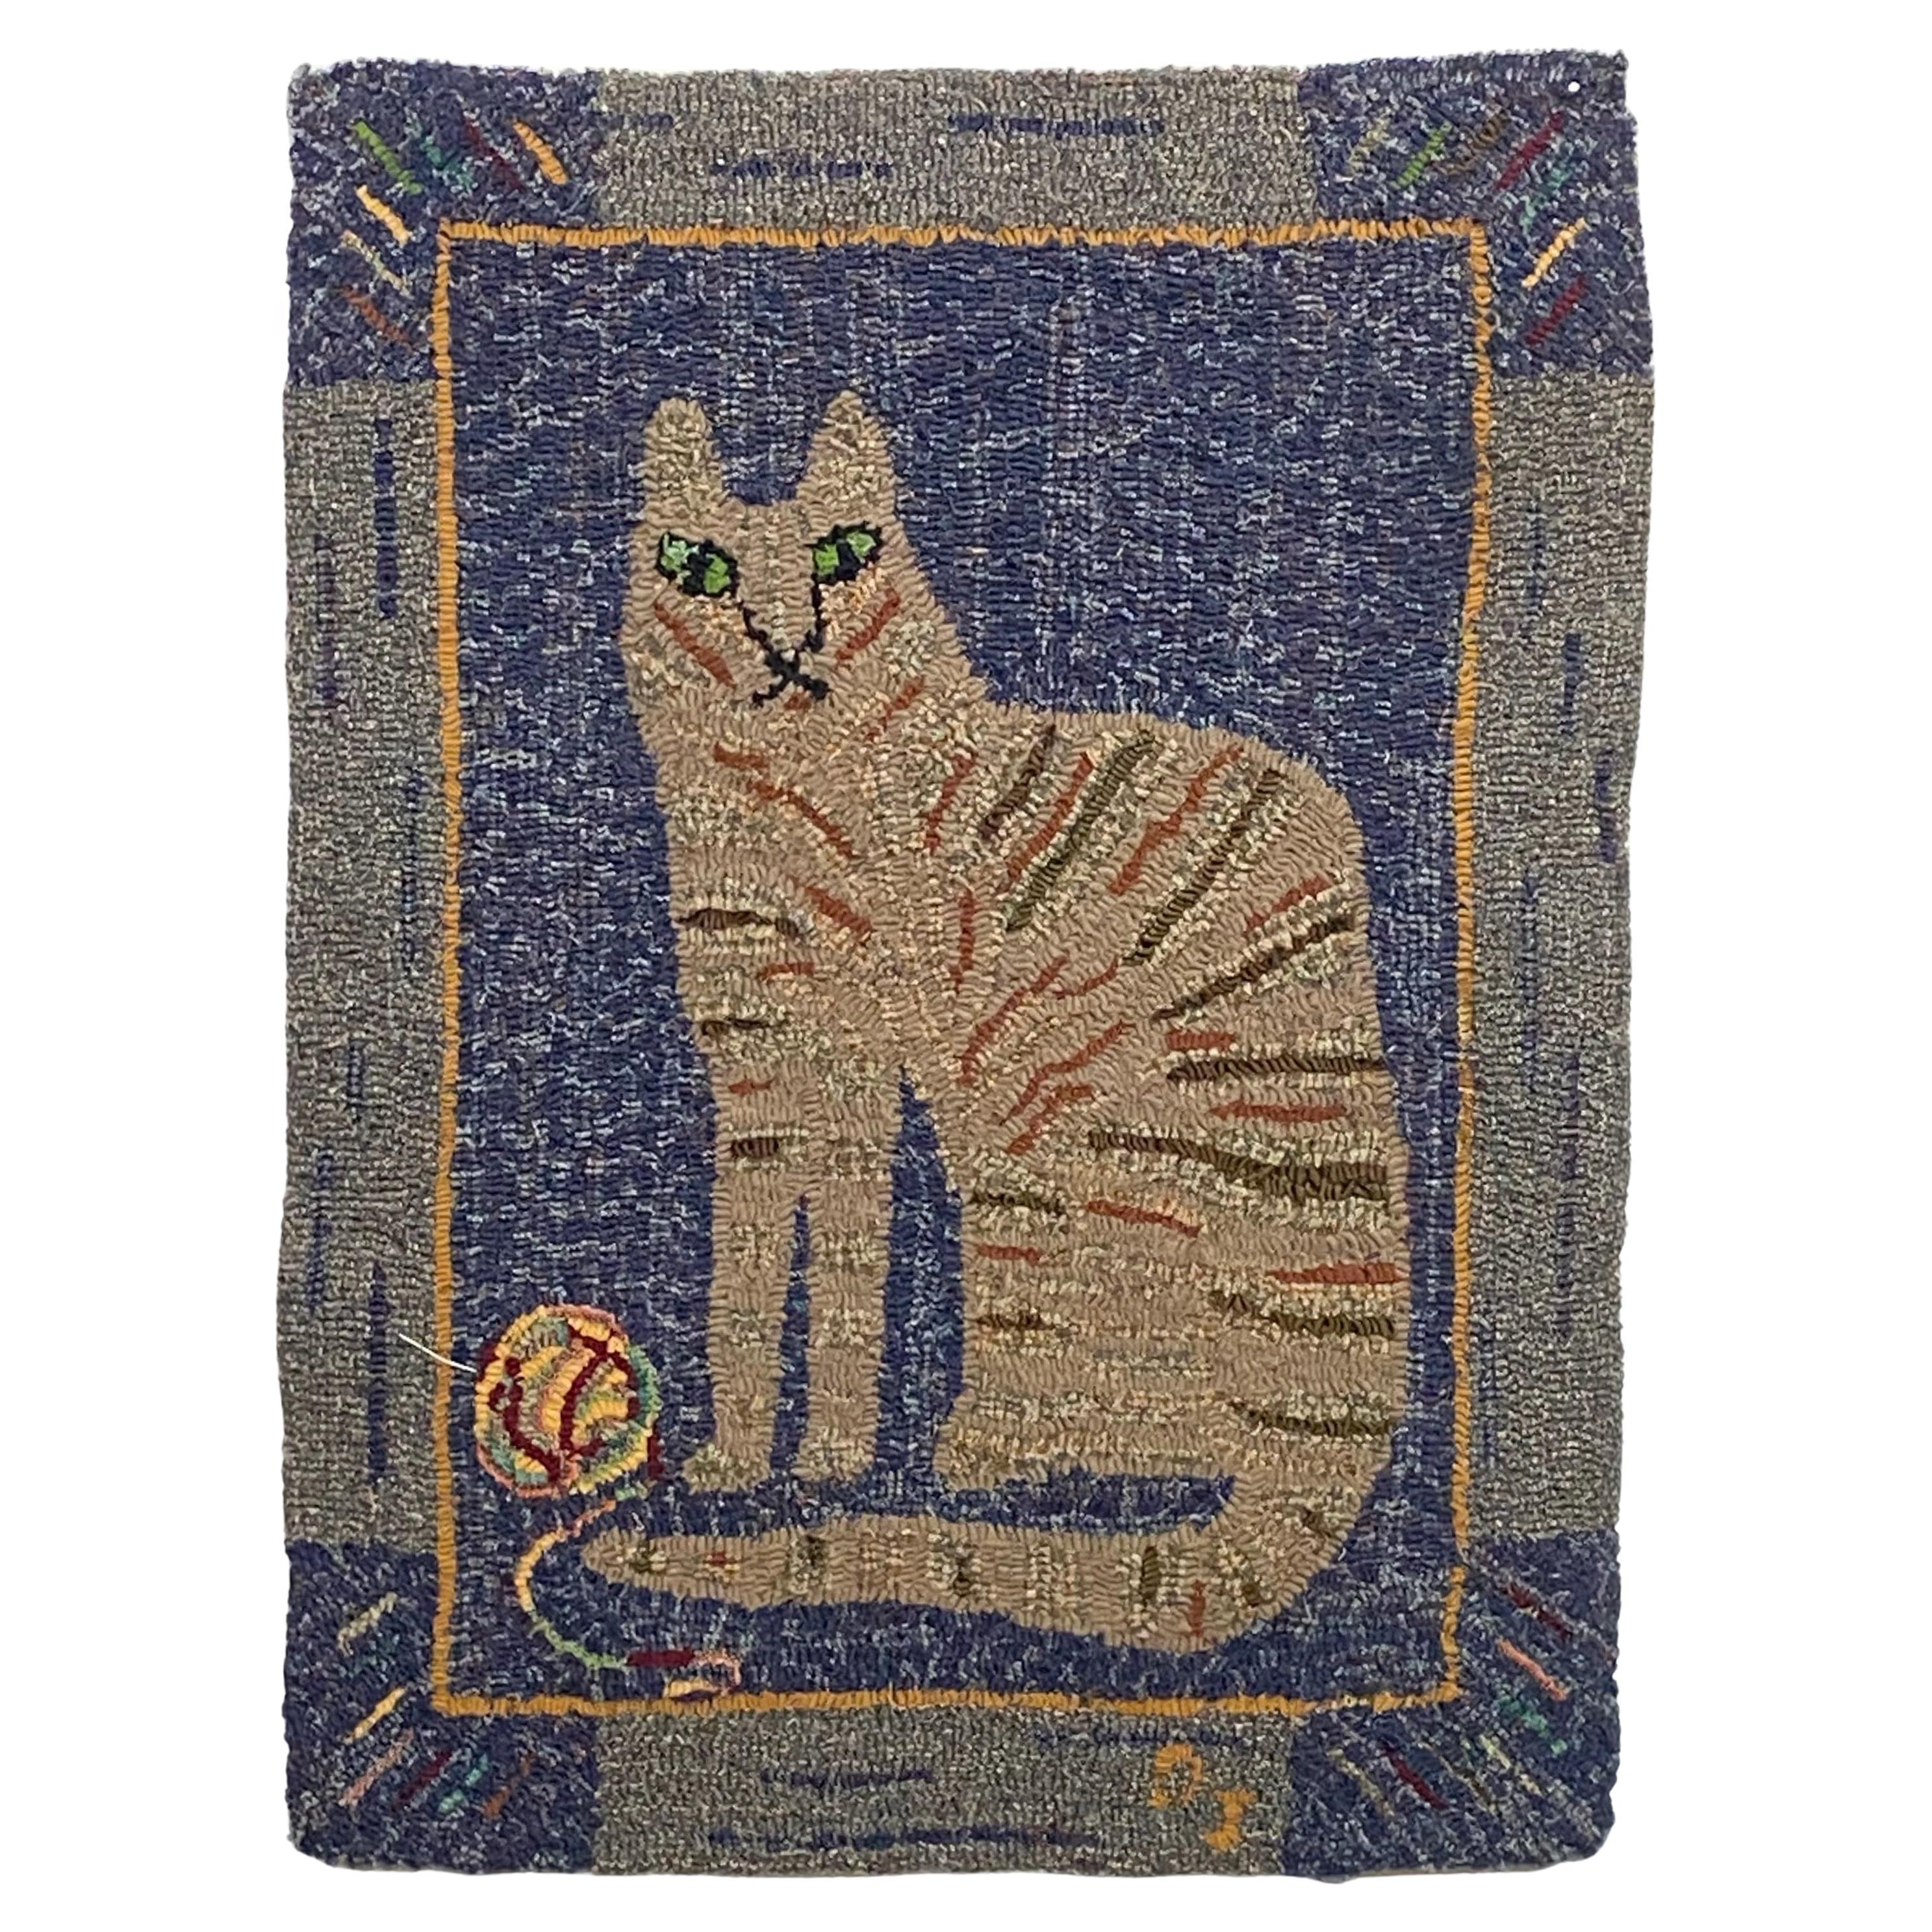 American Folk Art Hooked Rag Rug of a Cat, Early 20th Century